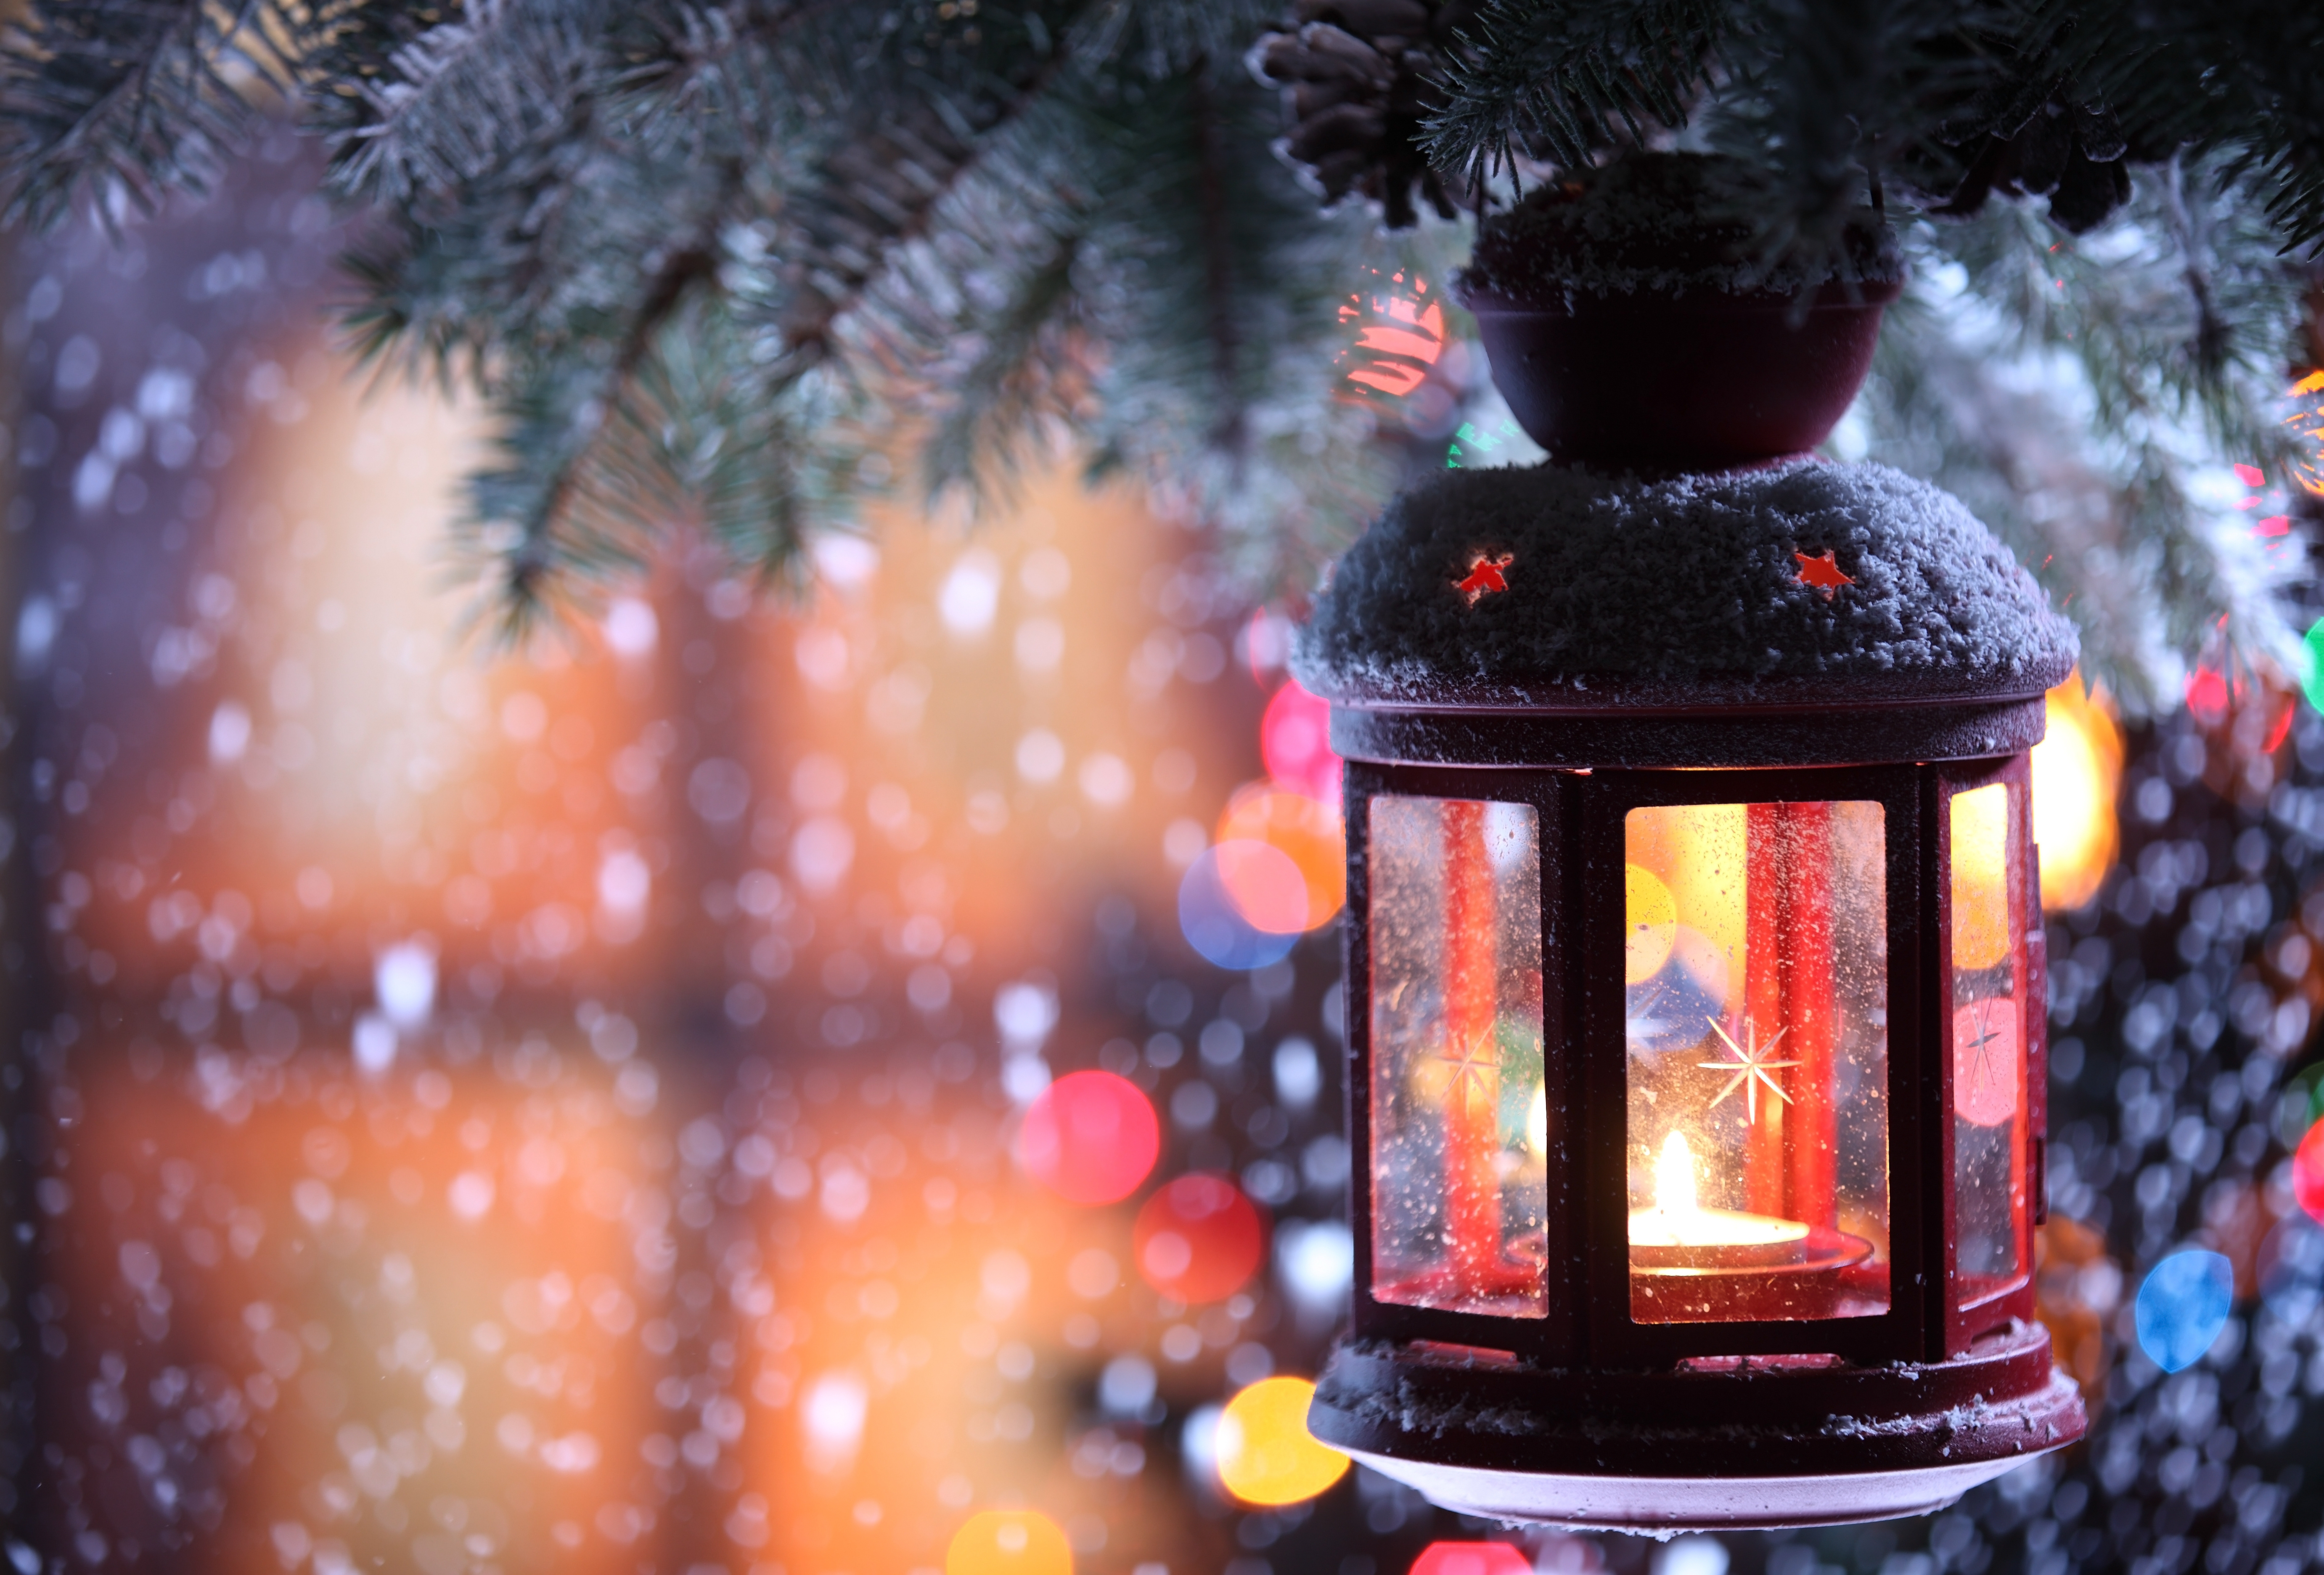 candlestick, branch, snowflakes, winter, holidays, snow, christmas tree, candle, flashlight